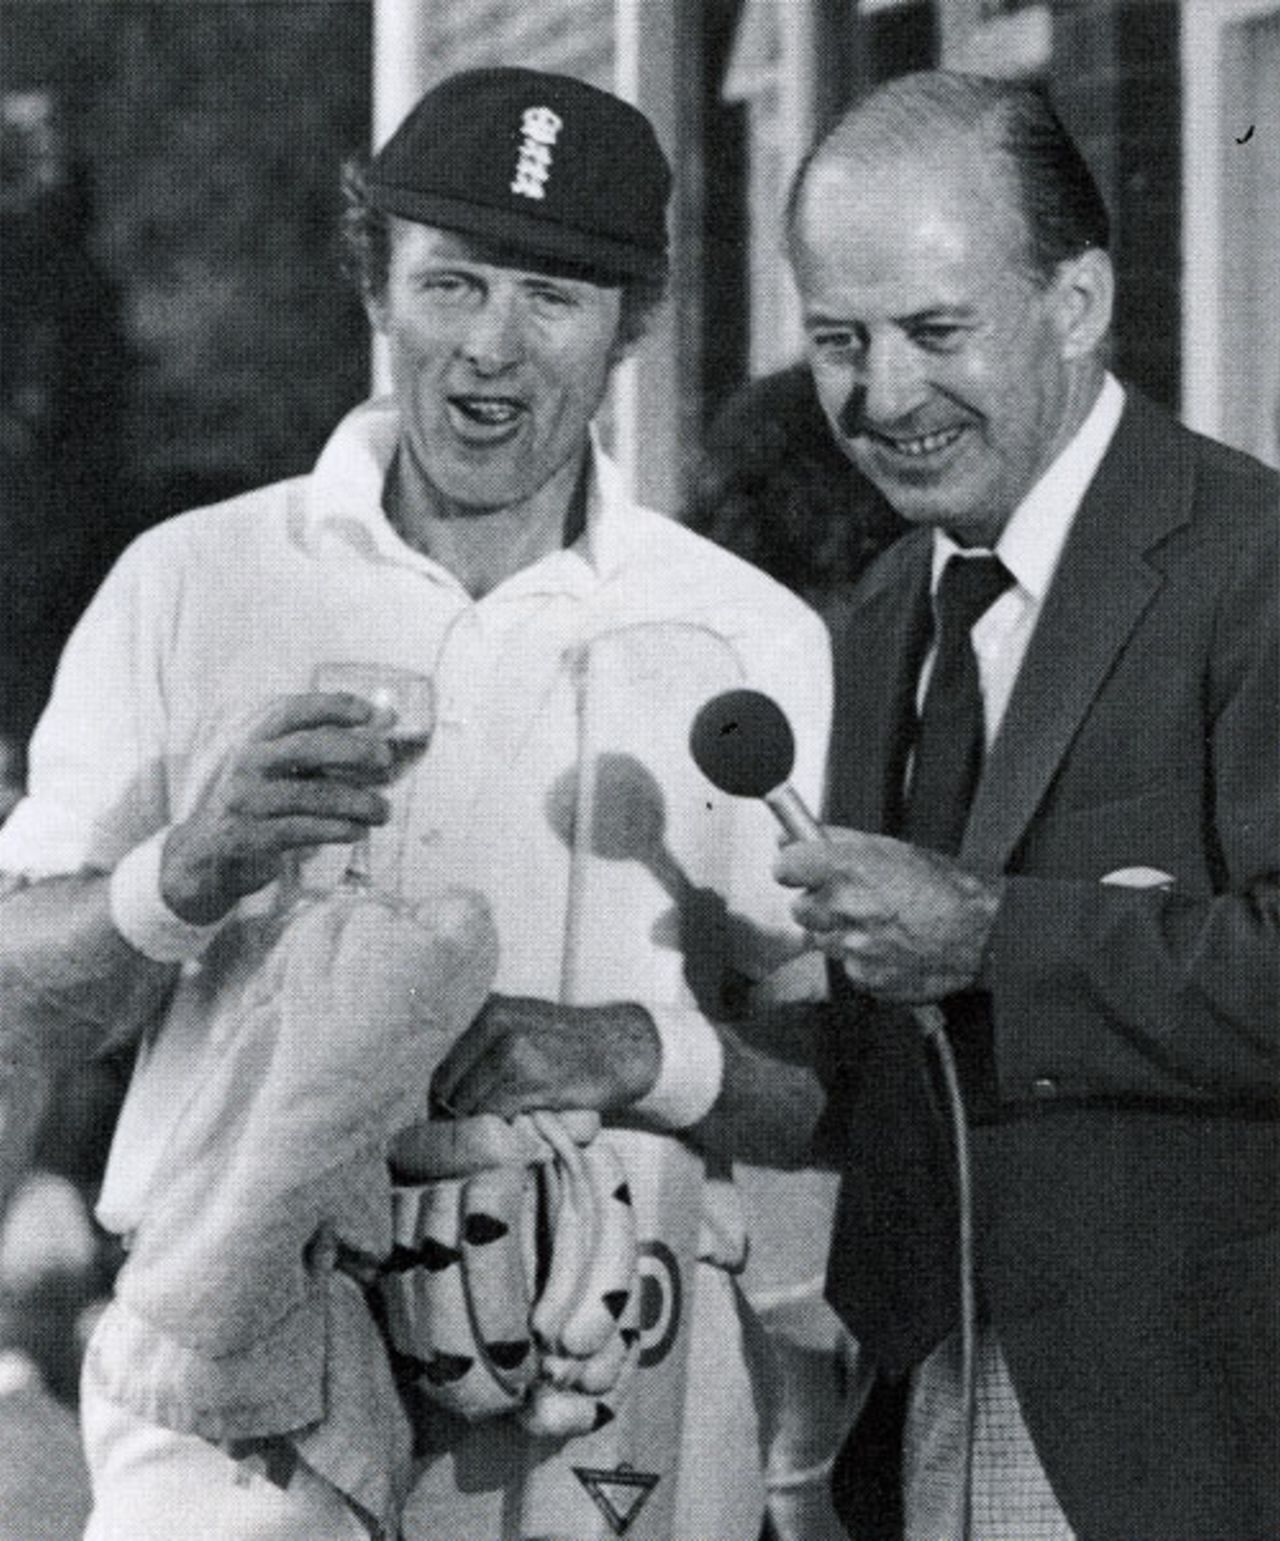 Geoff Boycott  is interviewed by BBC anchorman Peter West at the close of play after reaching his 100th hundred, England v Australia, 4th Test, Headingley, 1977